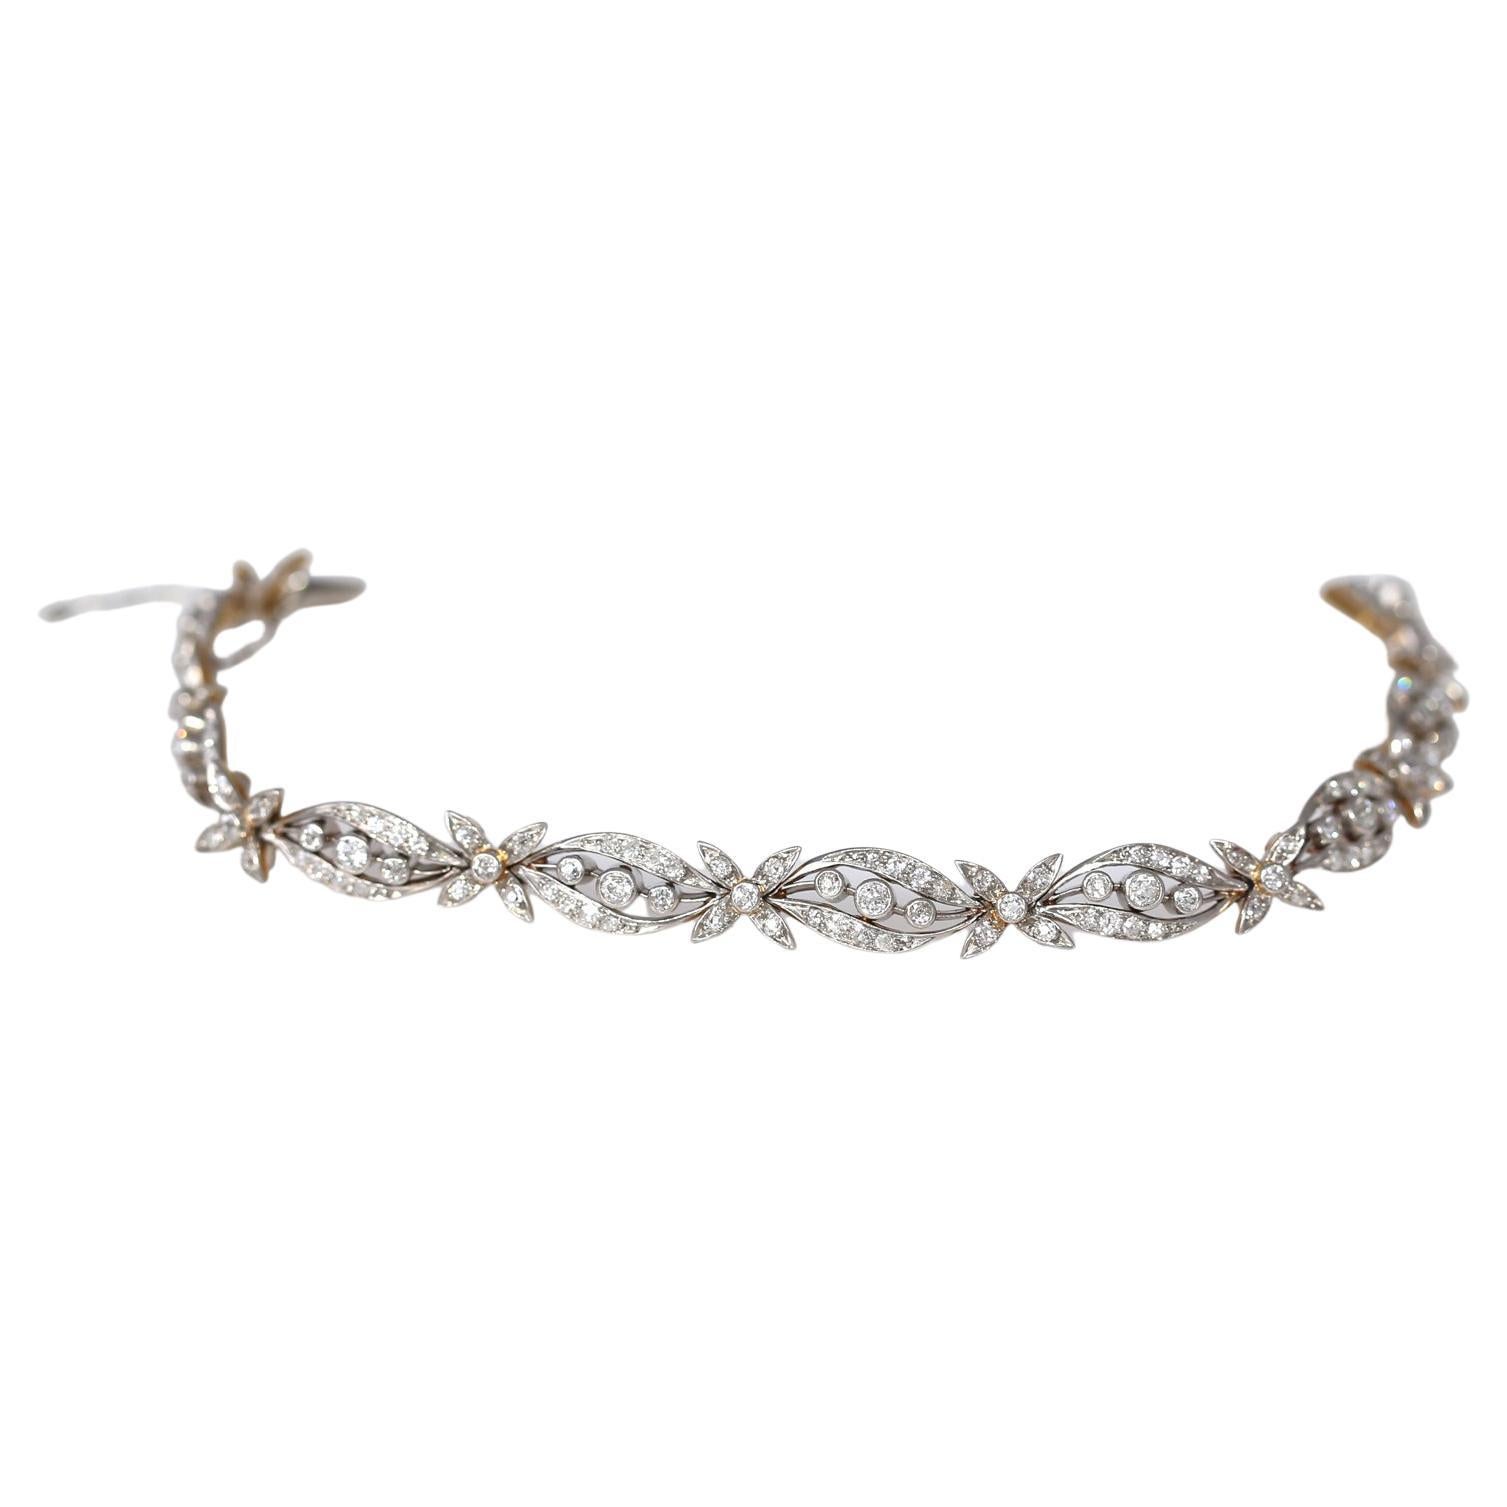 2.5 Carats Diamond Old Mine Bracelet. Created around 1930. Containing numerous old mine cut Diamonds weighing approximately 2.5 Carats in total. Mounted in Platinum-topped gold.

The floral design depicting flowers really reflects the era of the